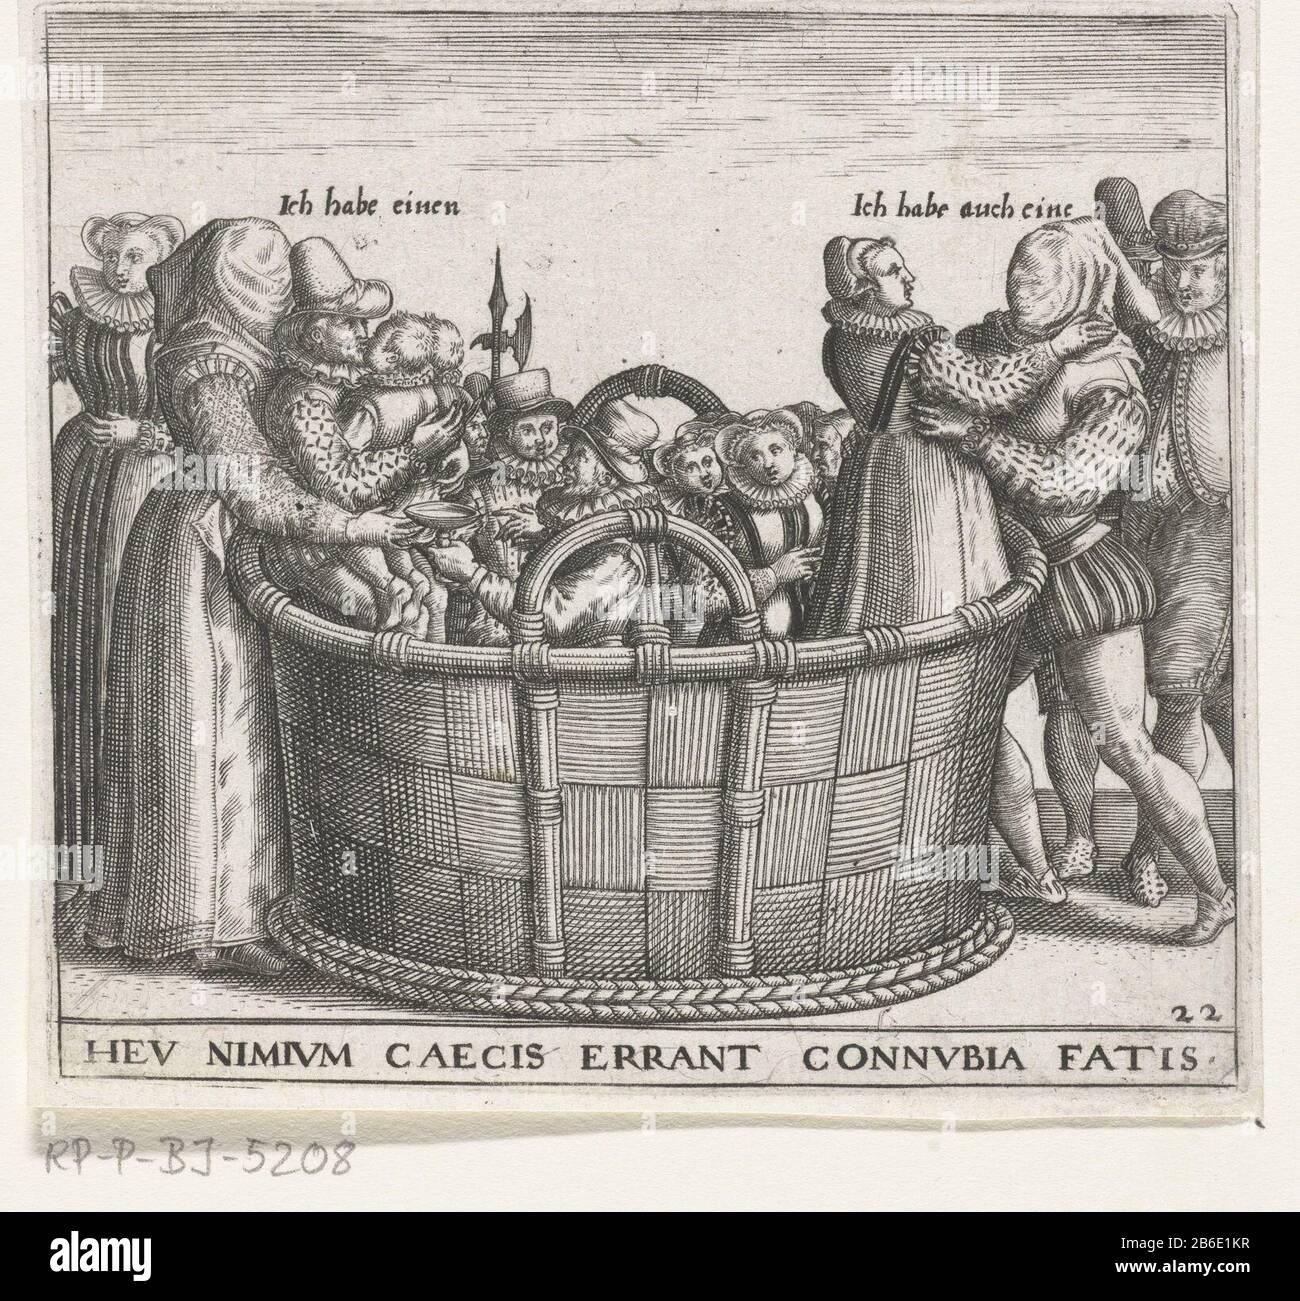 Blind choice for a spouse HEU NIMIUM VAECIS ERRANT CONNUBIA Fatis (title object) Emblemata Saecularia, 1596 (series title) In a large basket are men and women as potential suitors. Besides the basket are a man and a woman with a bag over their heads so they can not see the flaws of the suitors. They choose them blindly. The woman left pulls a widower from the basket holding two children in his arms. The man has the right to address a woman. Emblem No. 22 in Emblemata Saecularia, 1596 and No. 43 in the second edition of 1611. Manufacturer :.. Printmaker Johann Theodor de Brynaar print by: anony Stock Photo